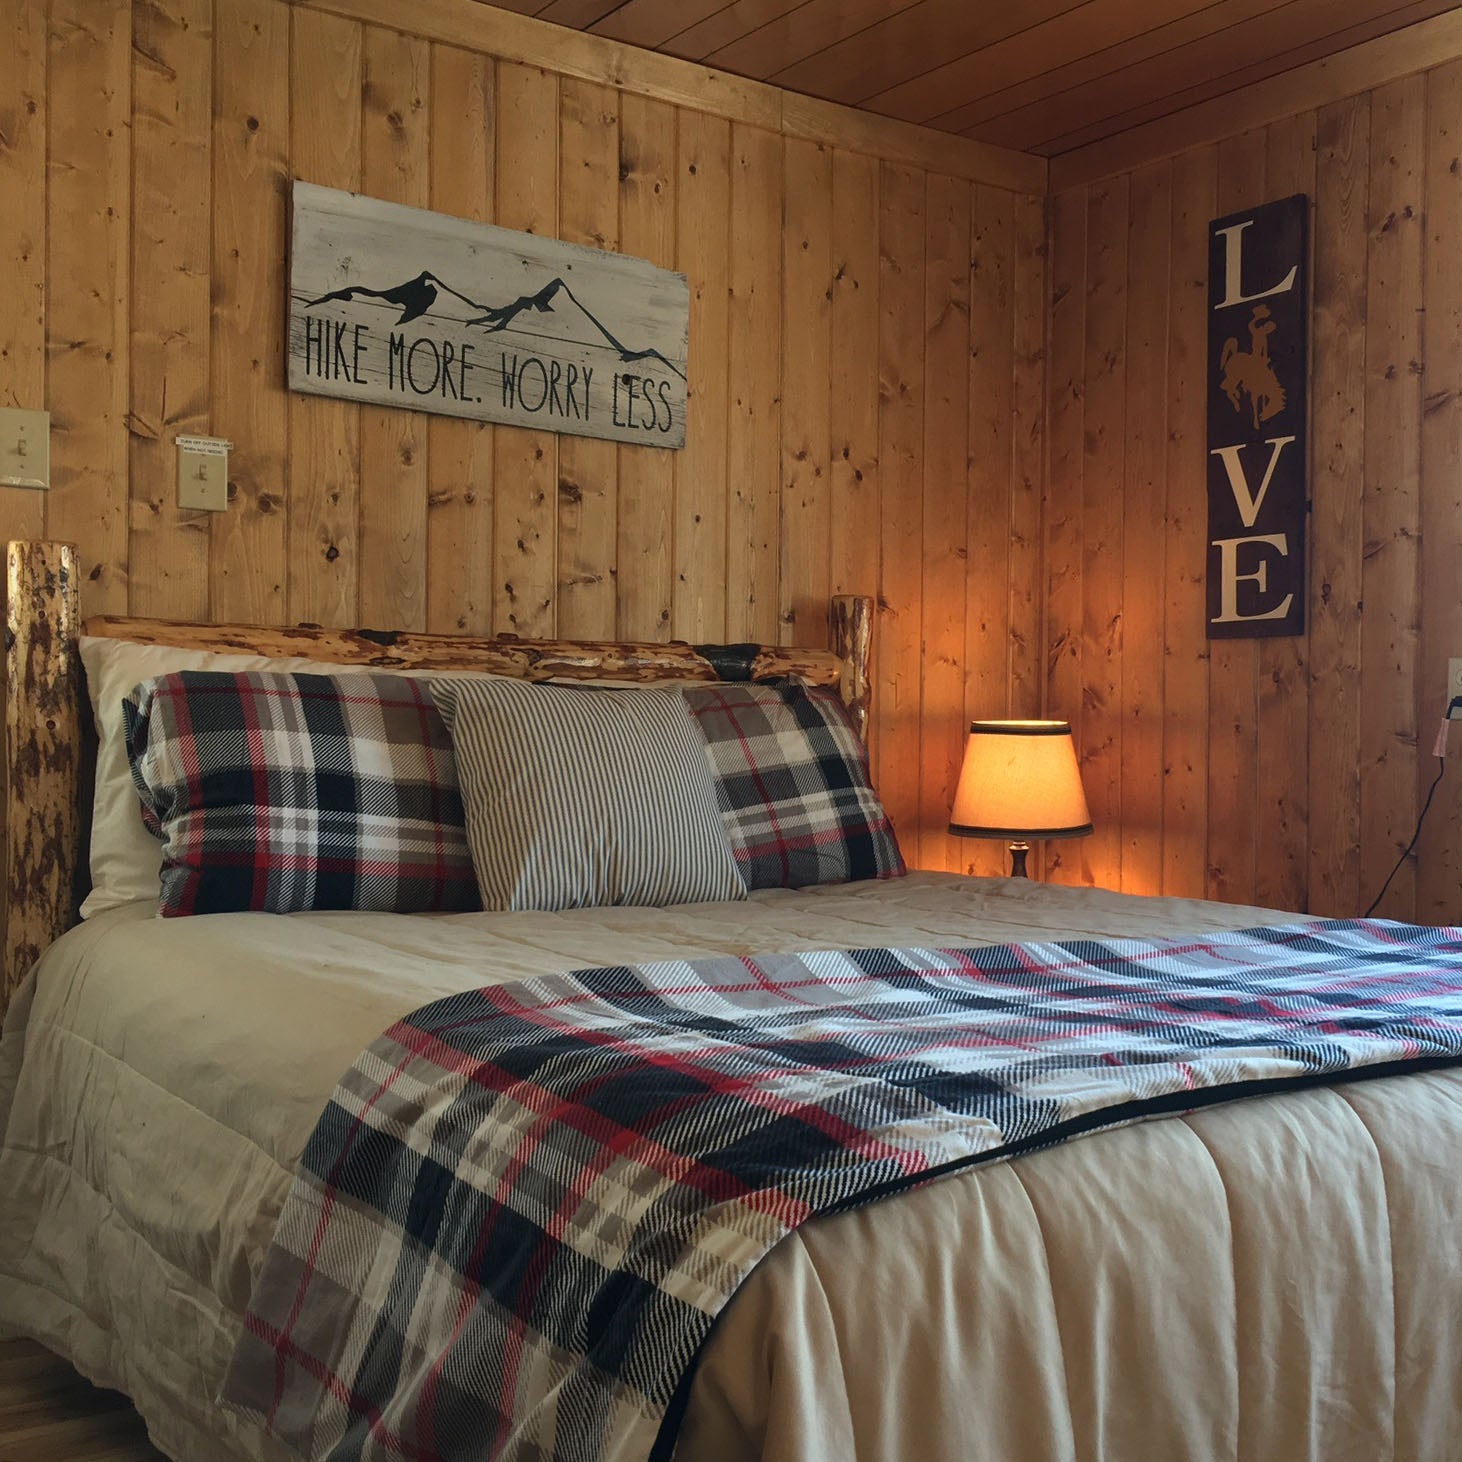 Bunkhouse bed